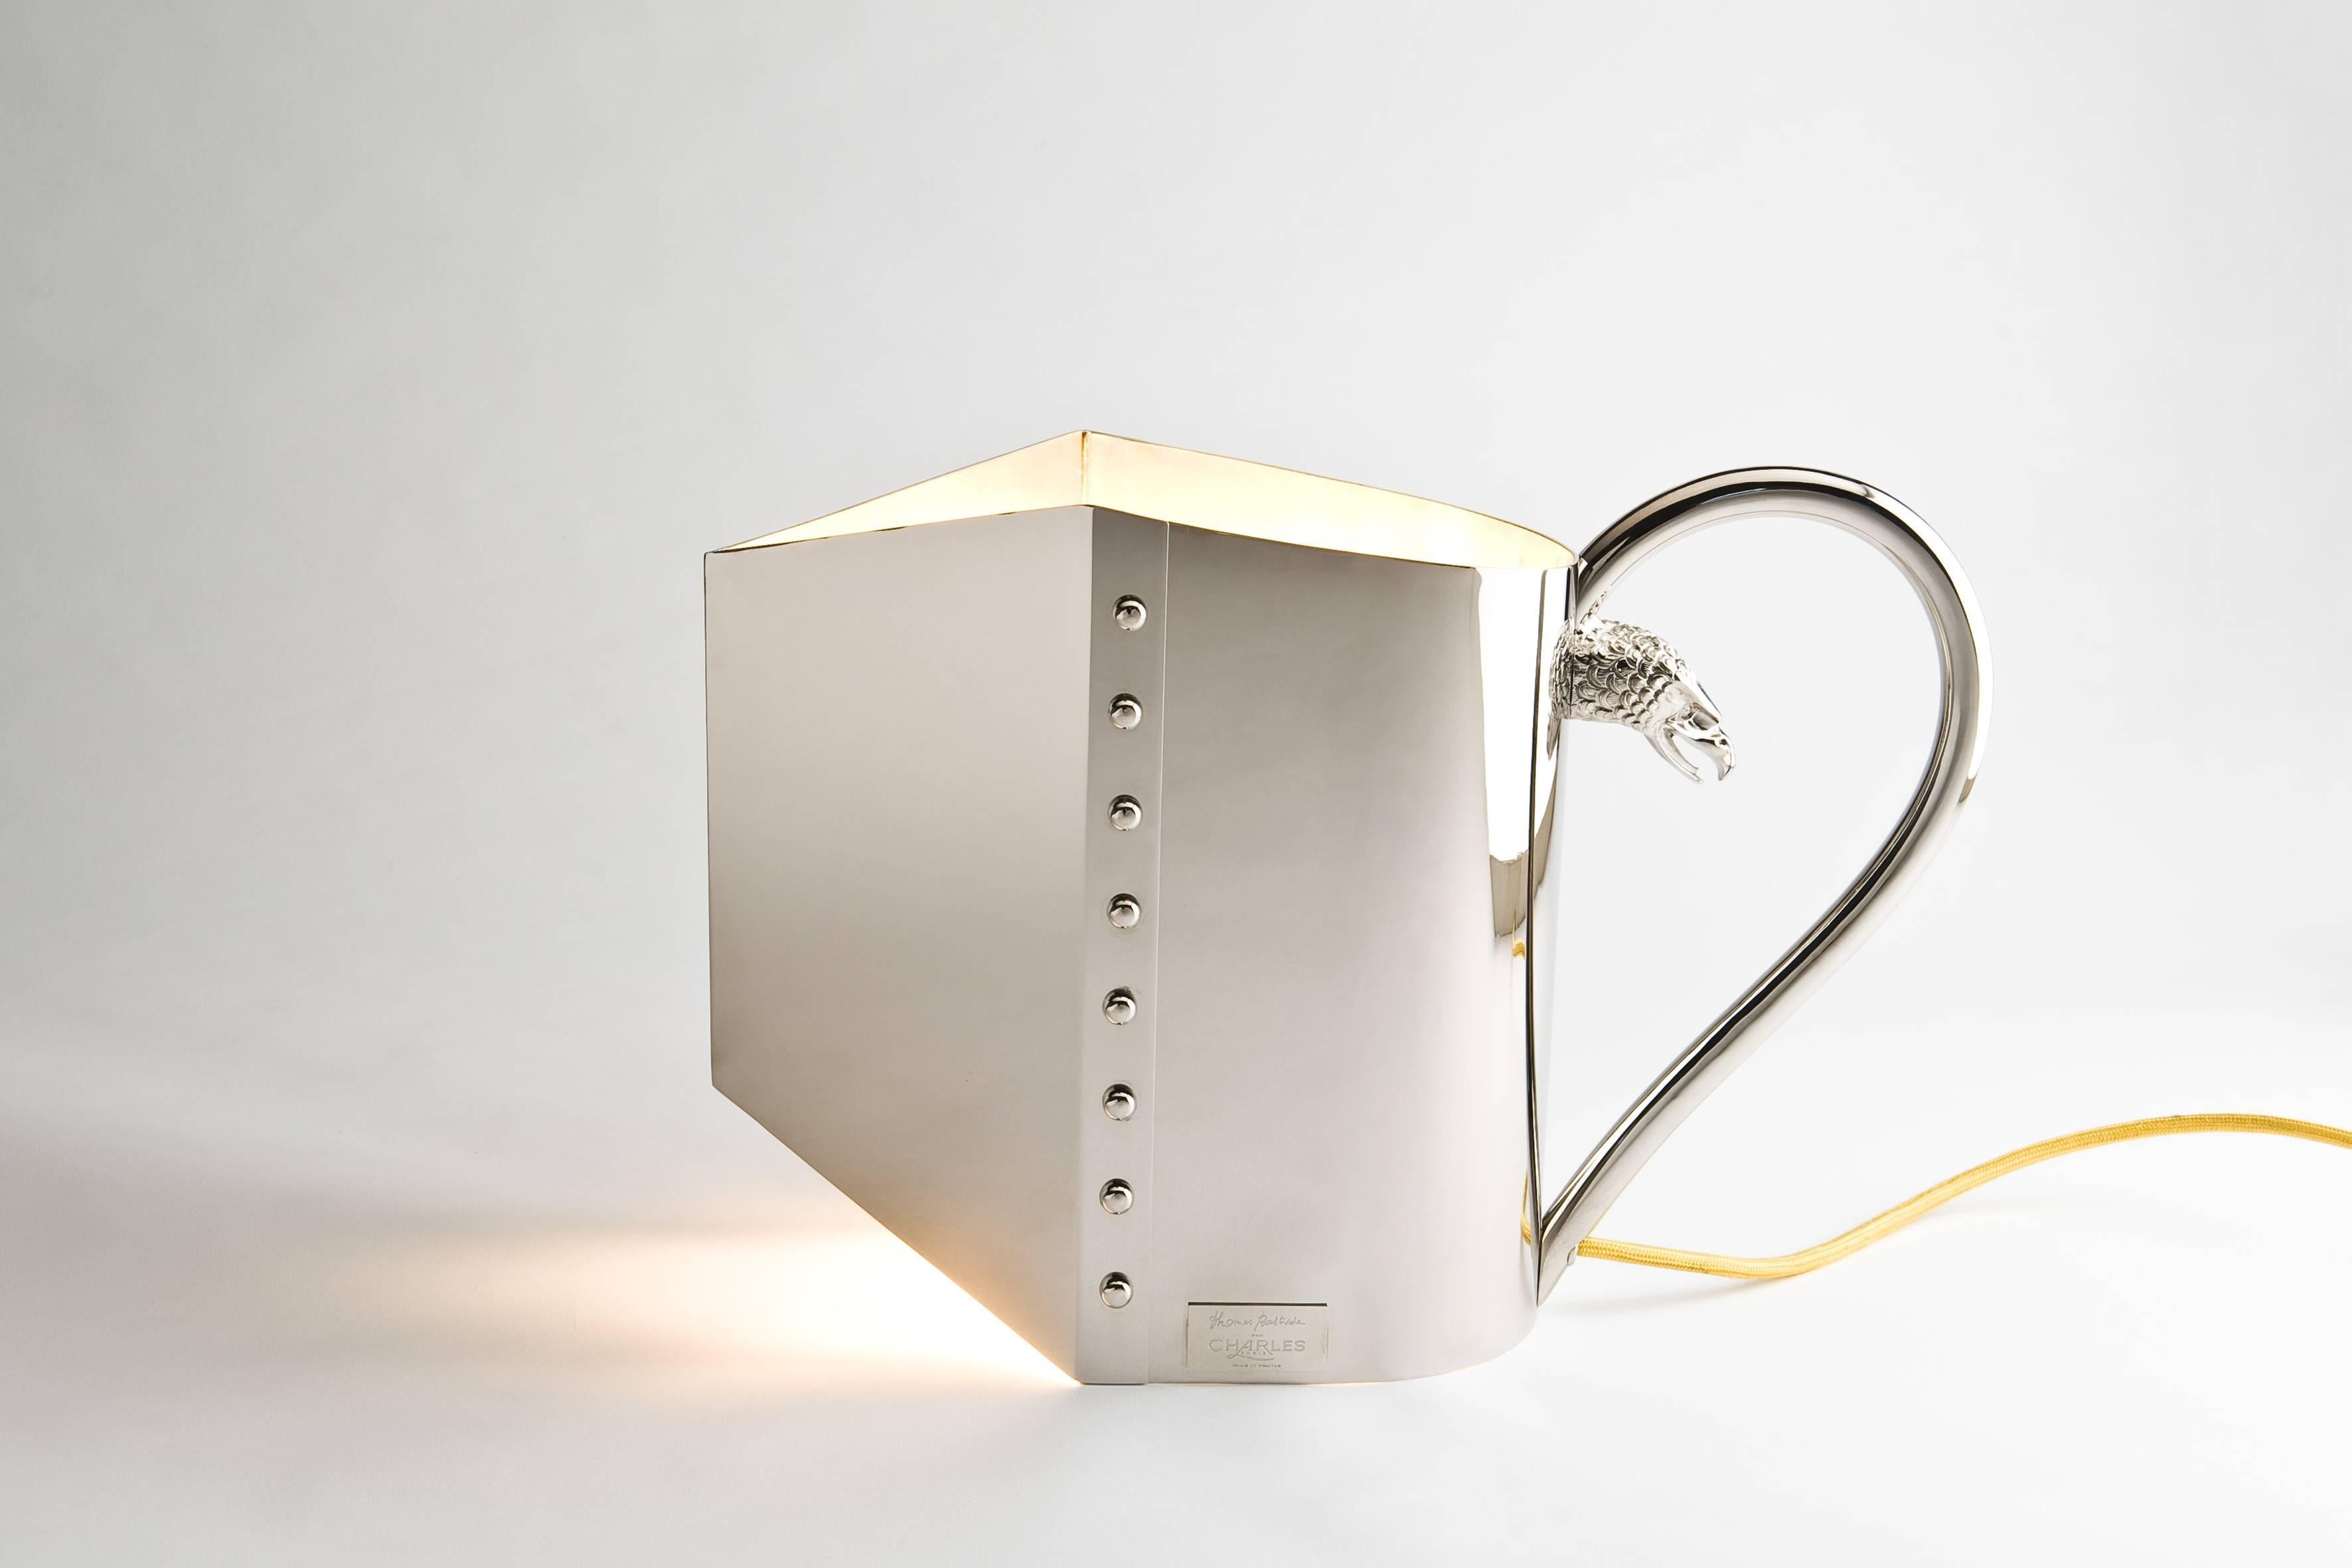 Verseuse table lamp
Design by Thomas Bastide
Made of brass
This lamp has two different sitting positions.